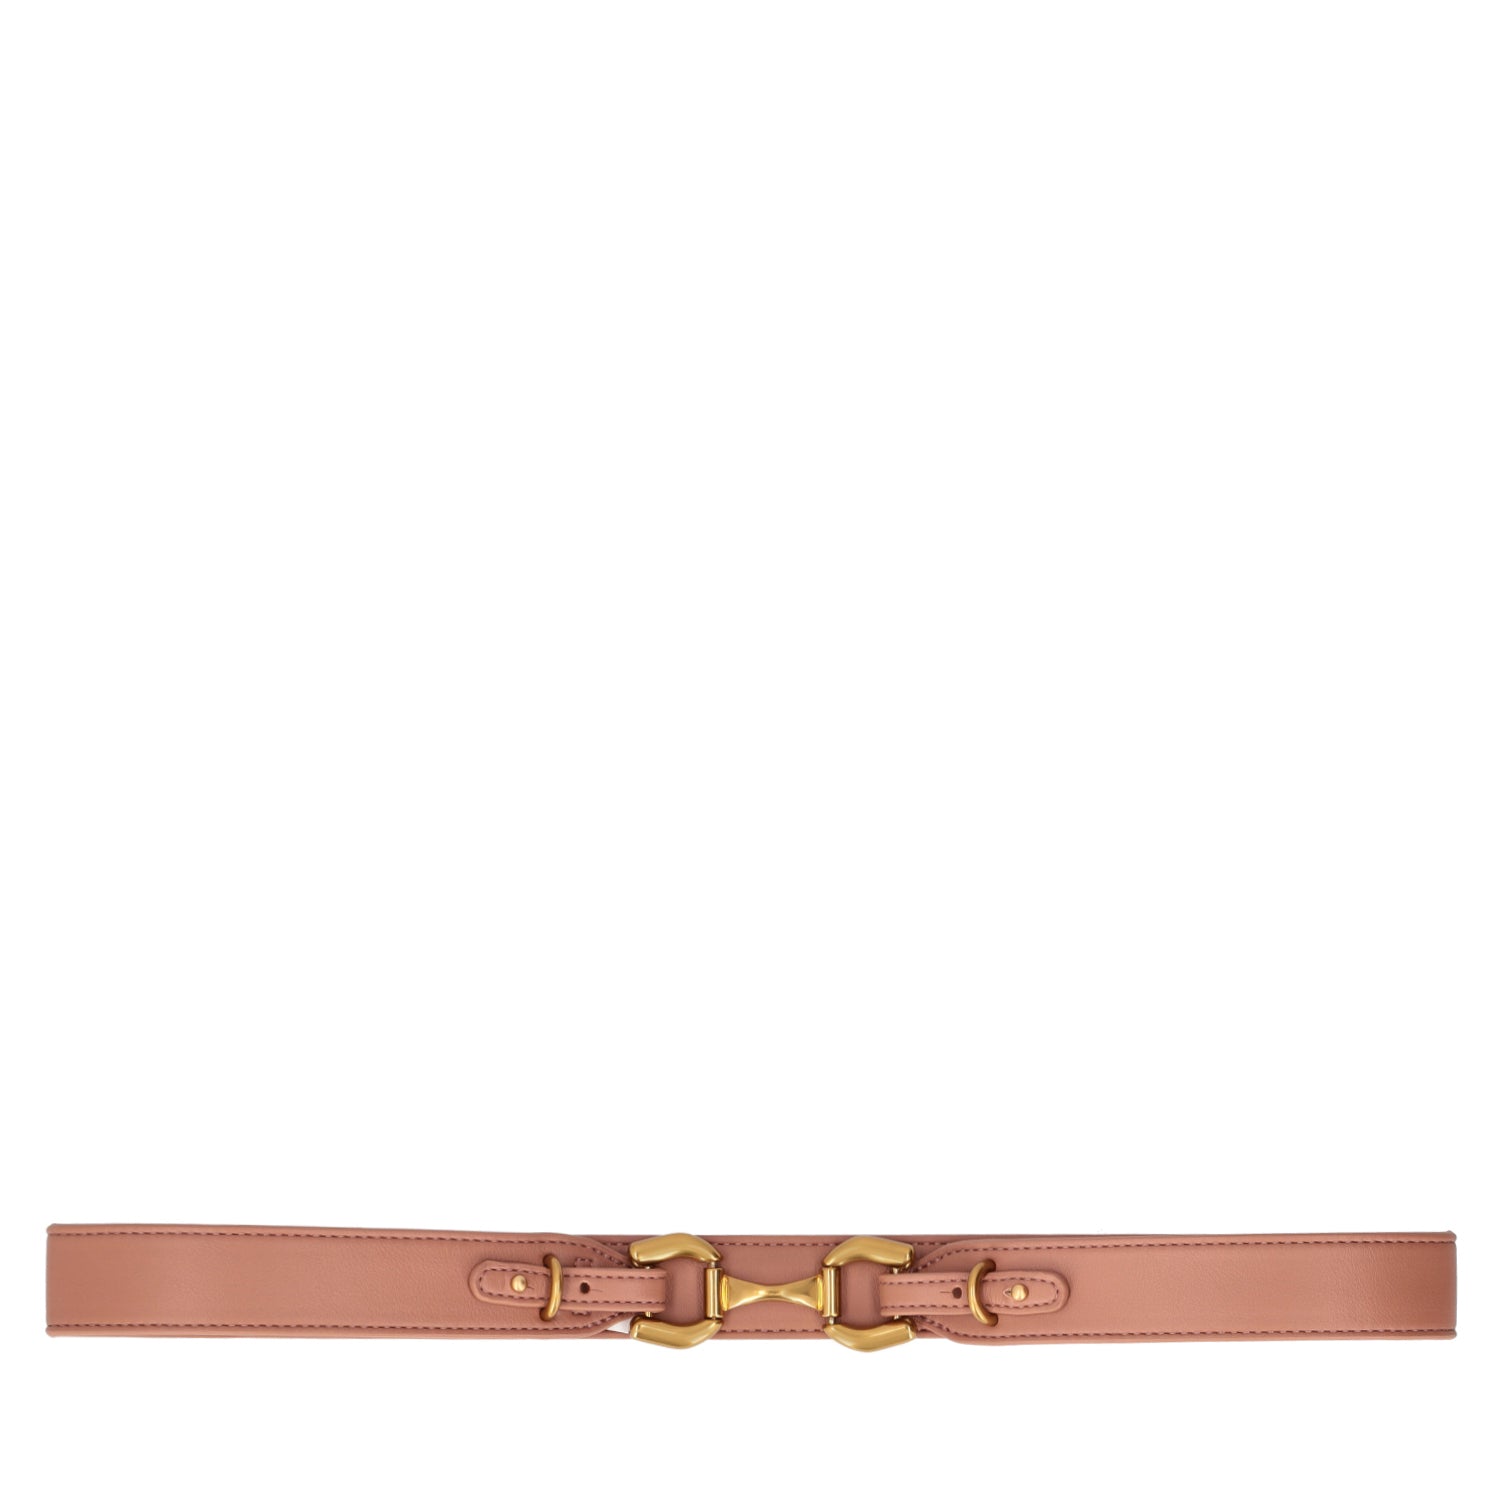 NUT BELT WITH GOLDEN CLAMP BUCKLE